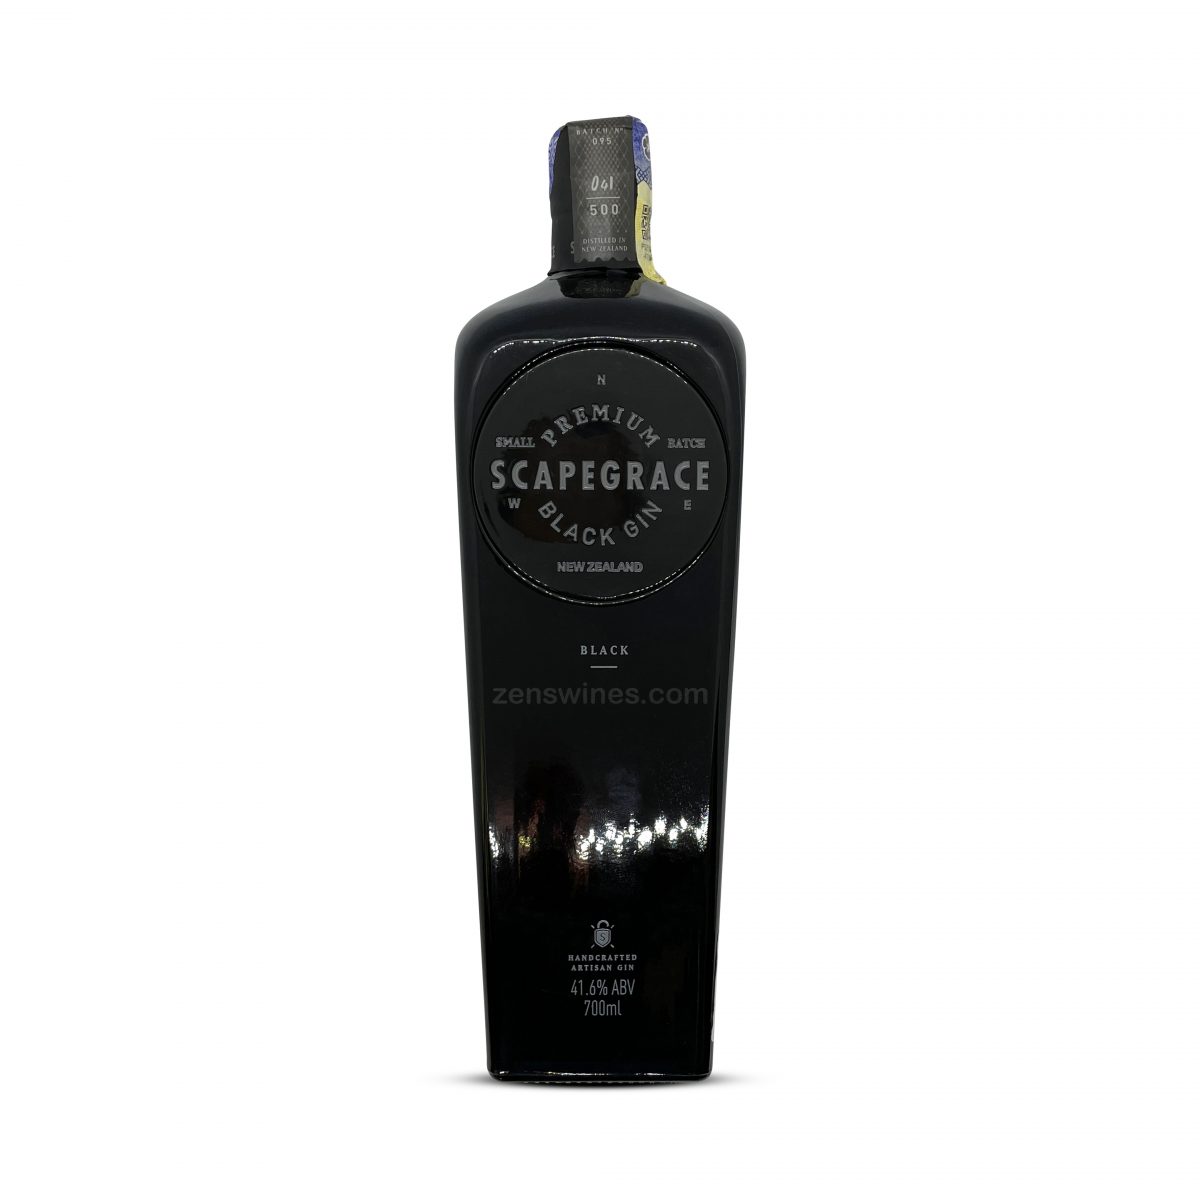 SCAPEGRACE BLACK GIN RM420